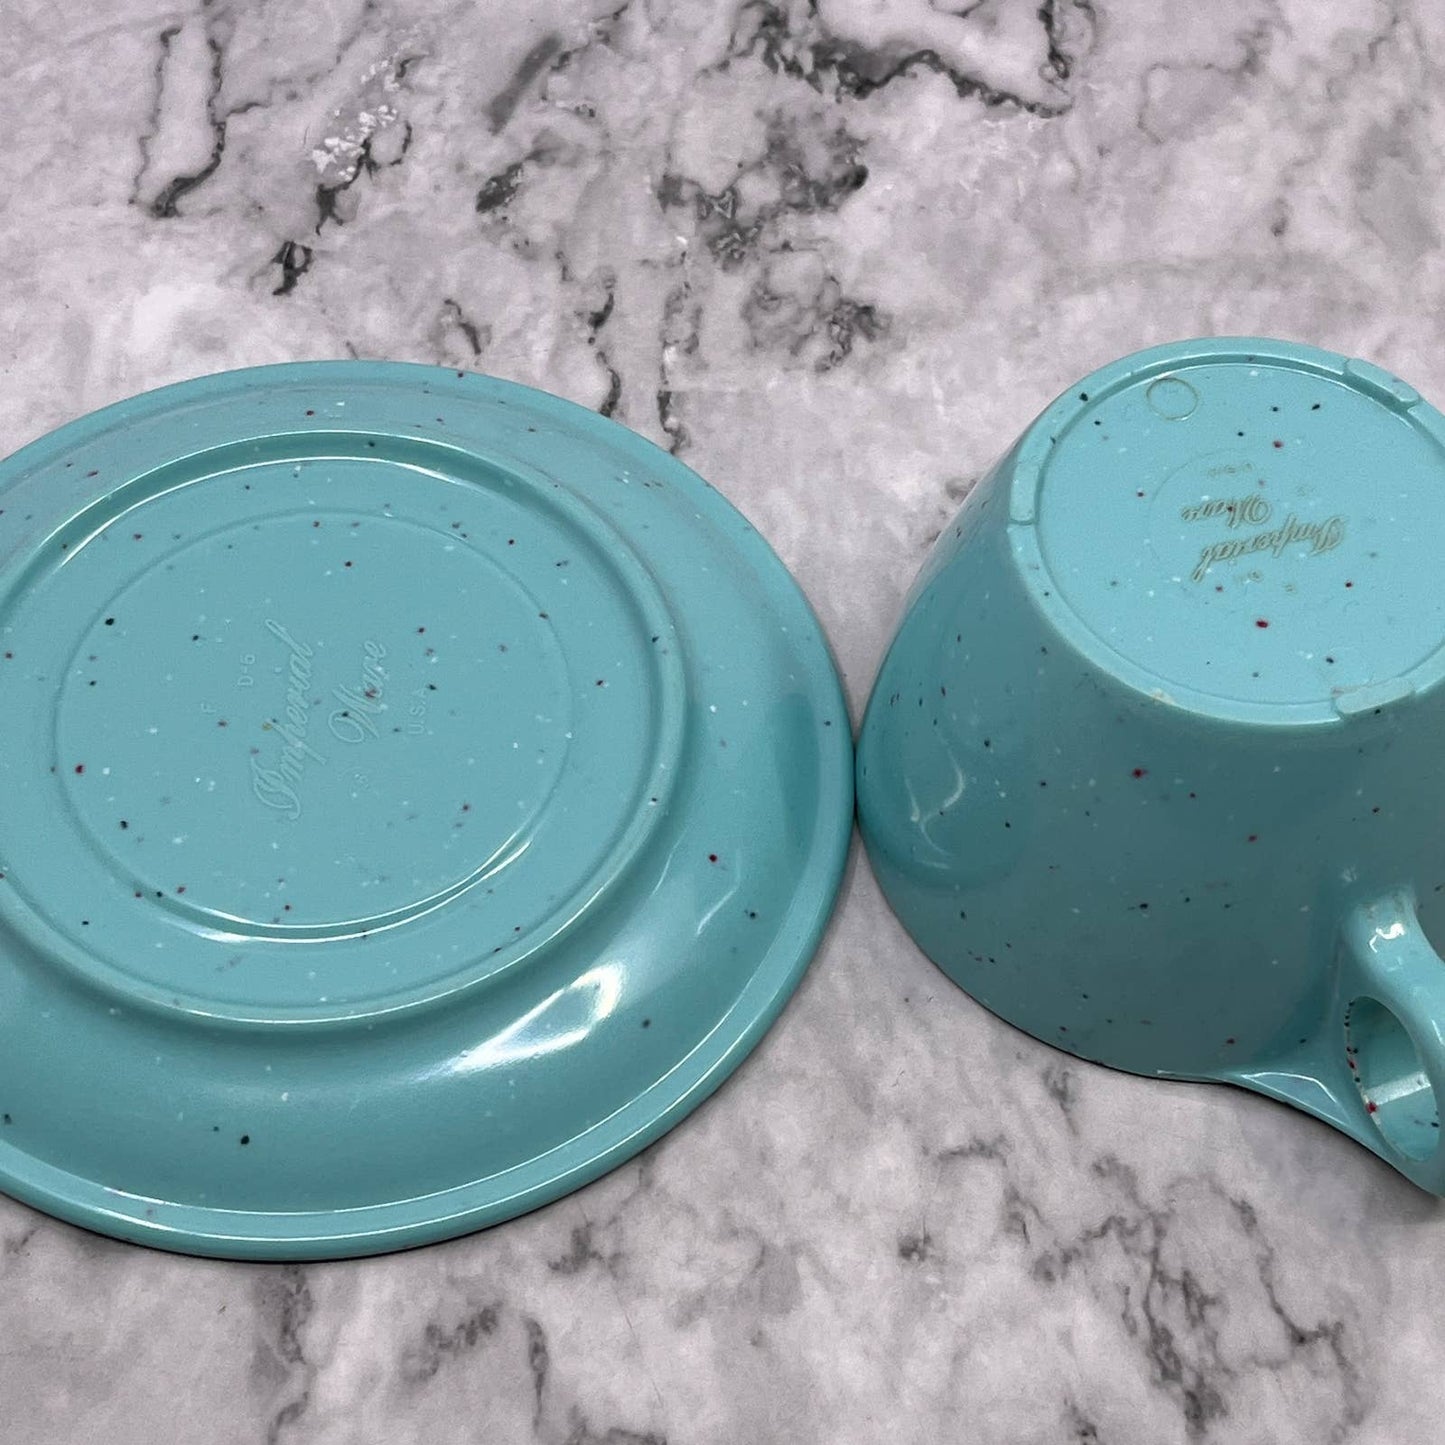 Imperial Ware Speckled Confetti Teal Blue MCM Cup & Saucer Melmac Malamine TA3-2